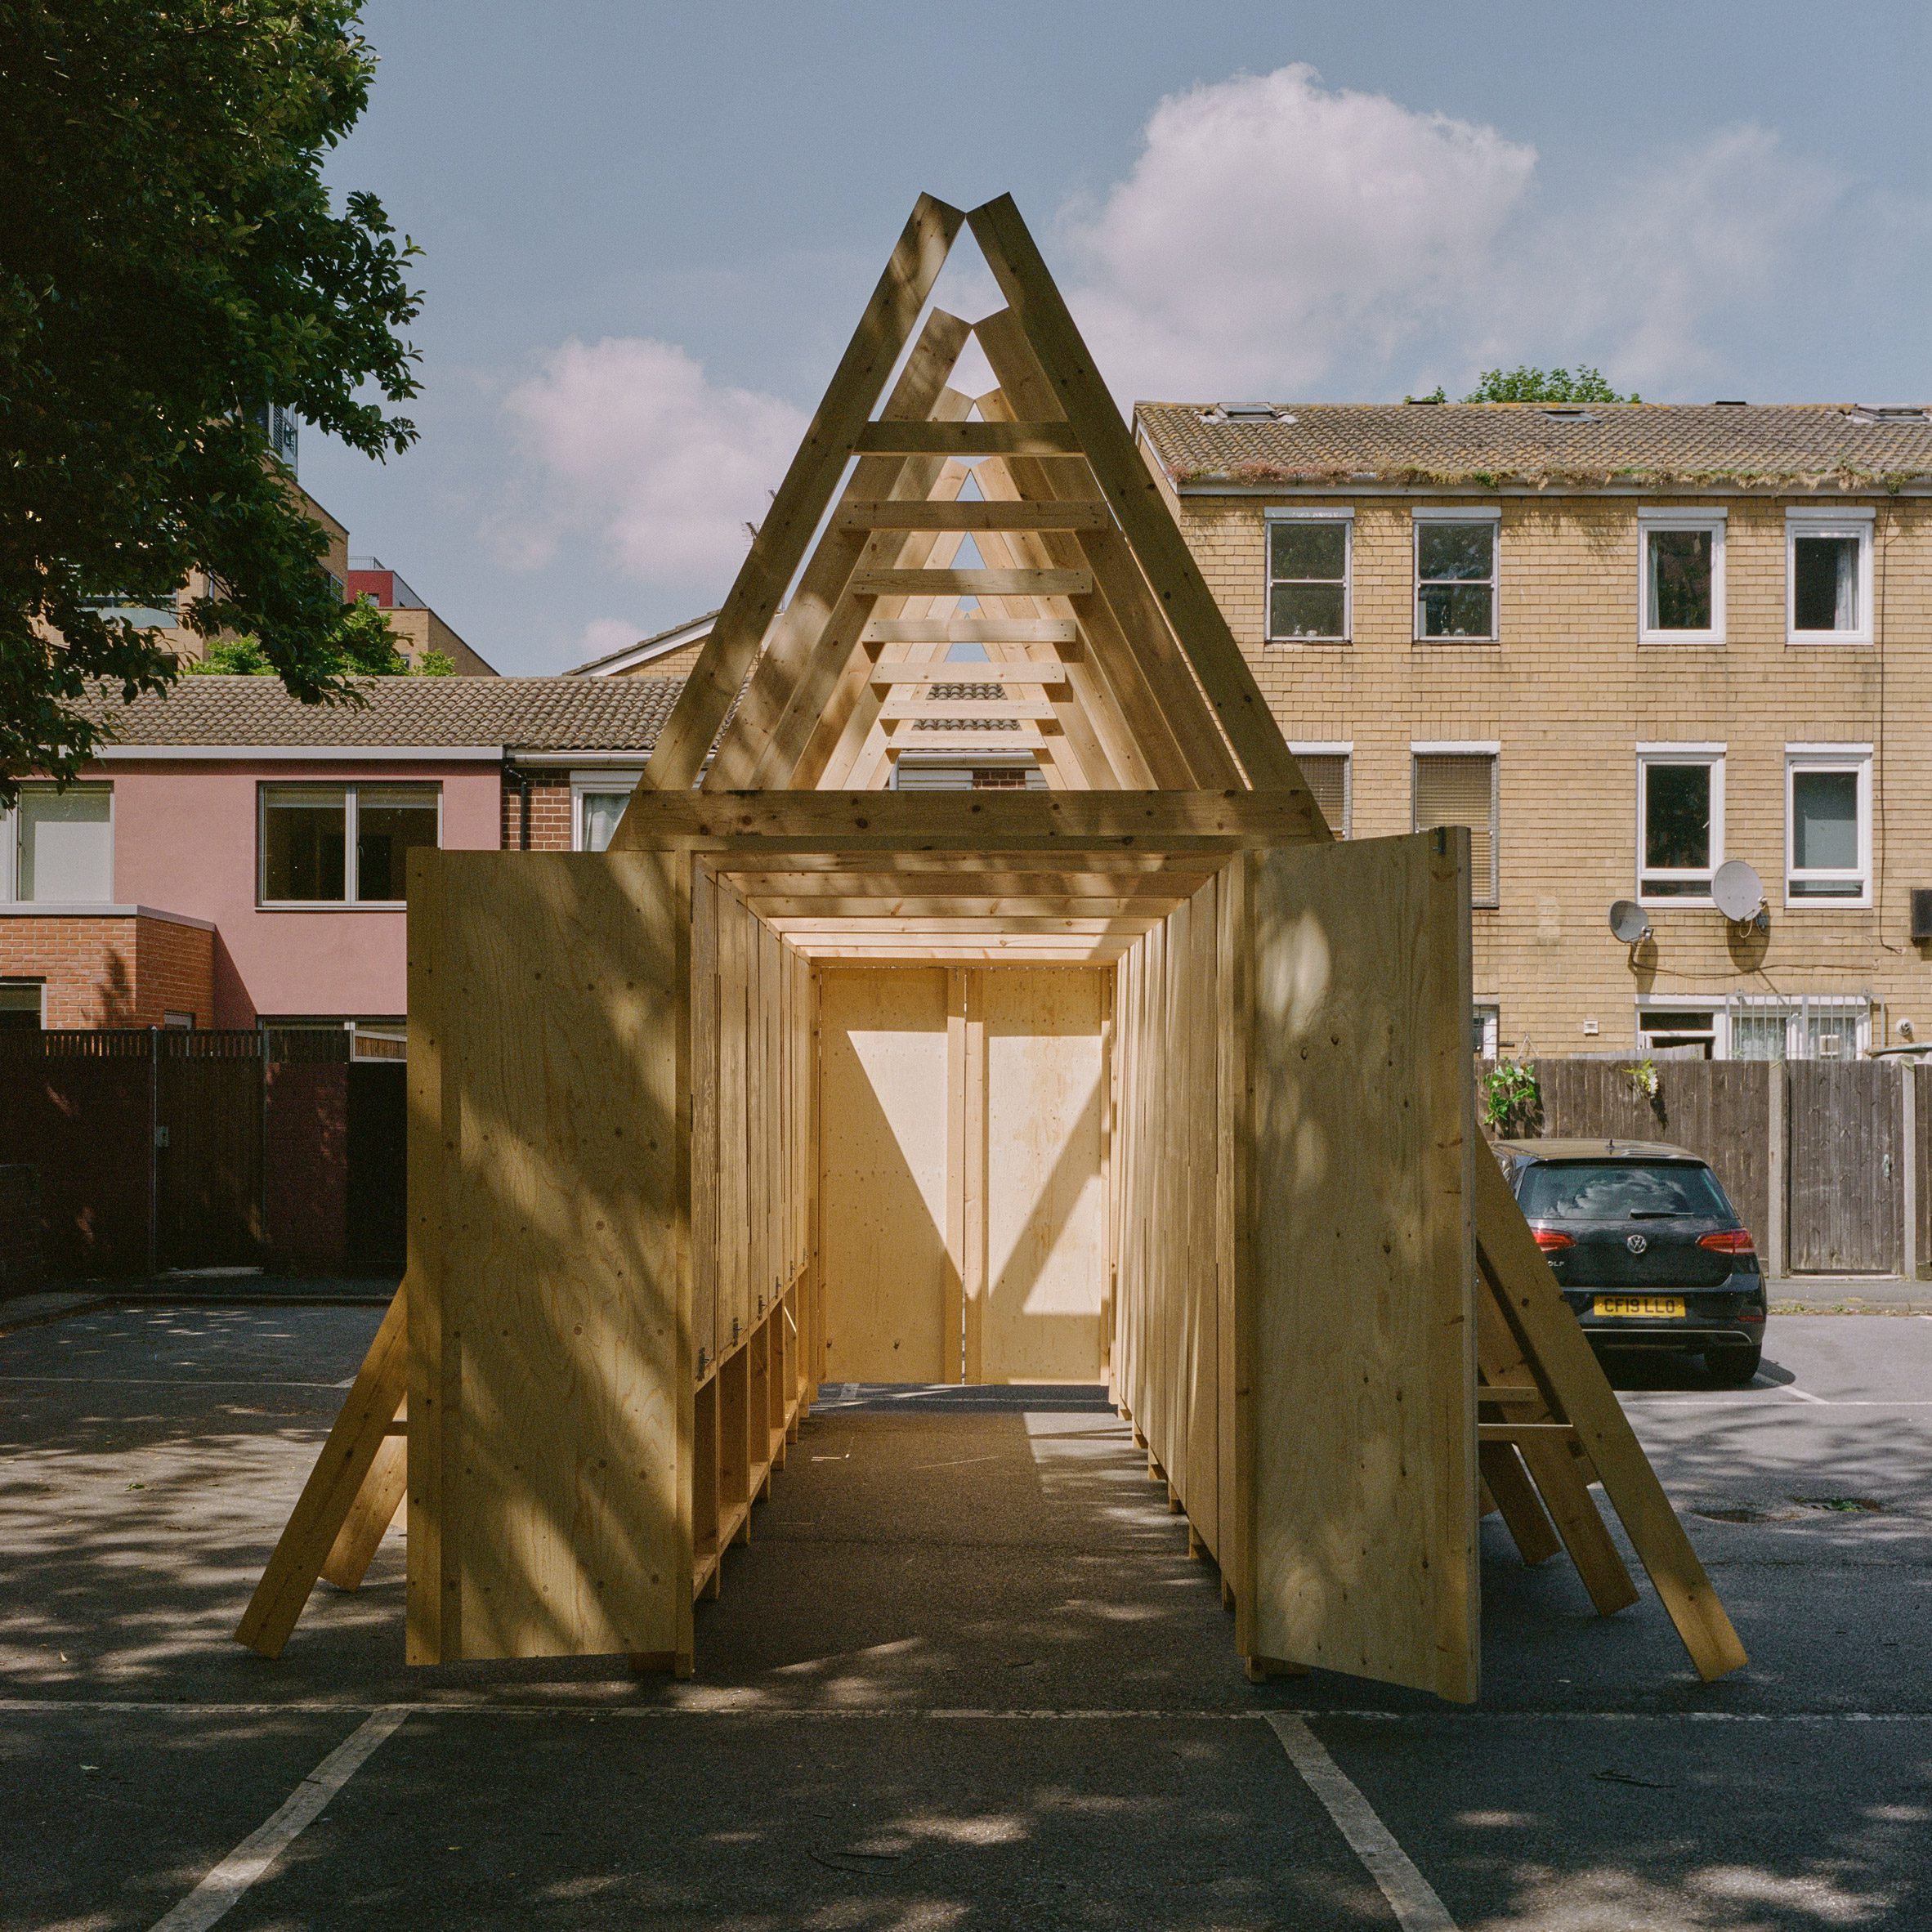 The Dalston Pavilion for the London Festival of Architecture